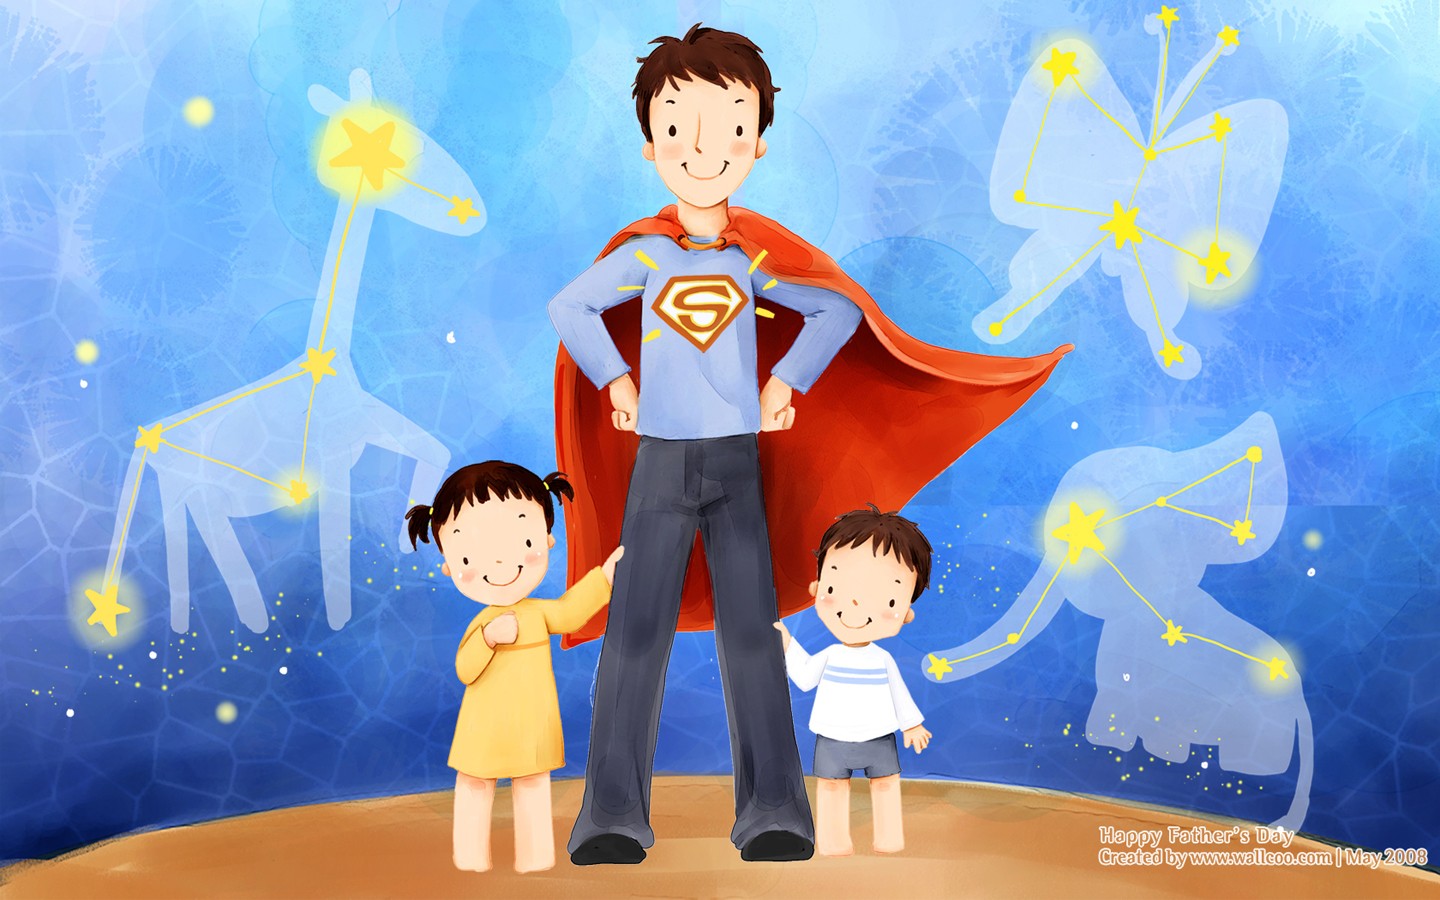 Happy Fathers Day - Childrens illustration for Fathers Day